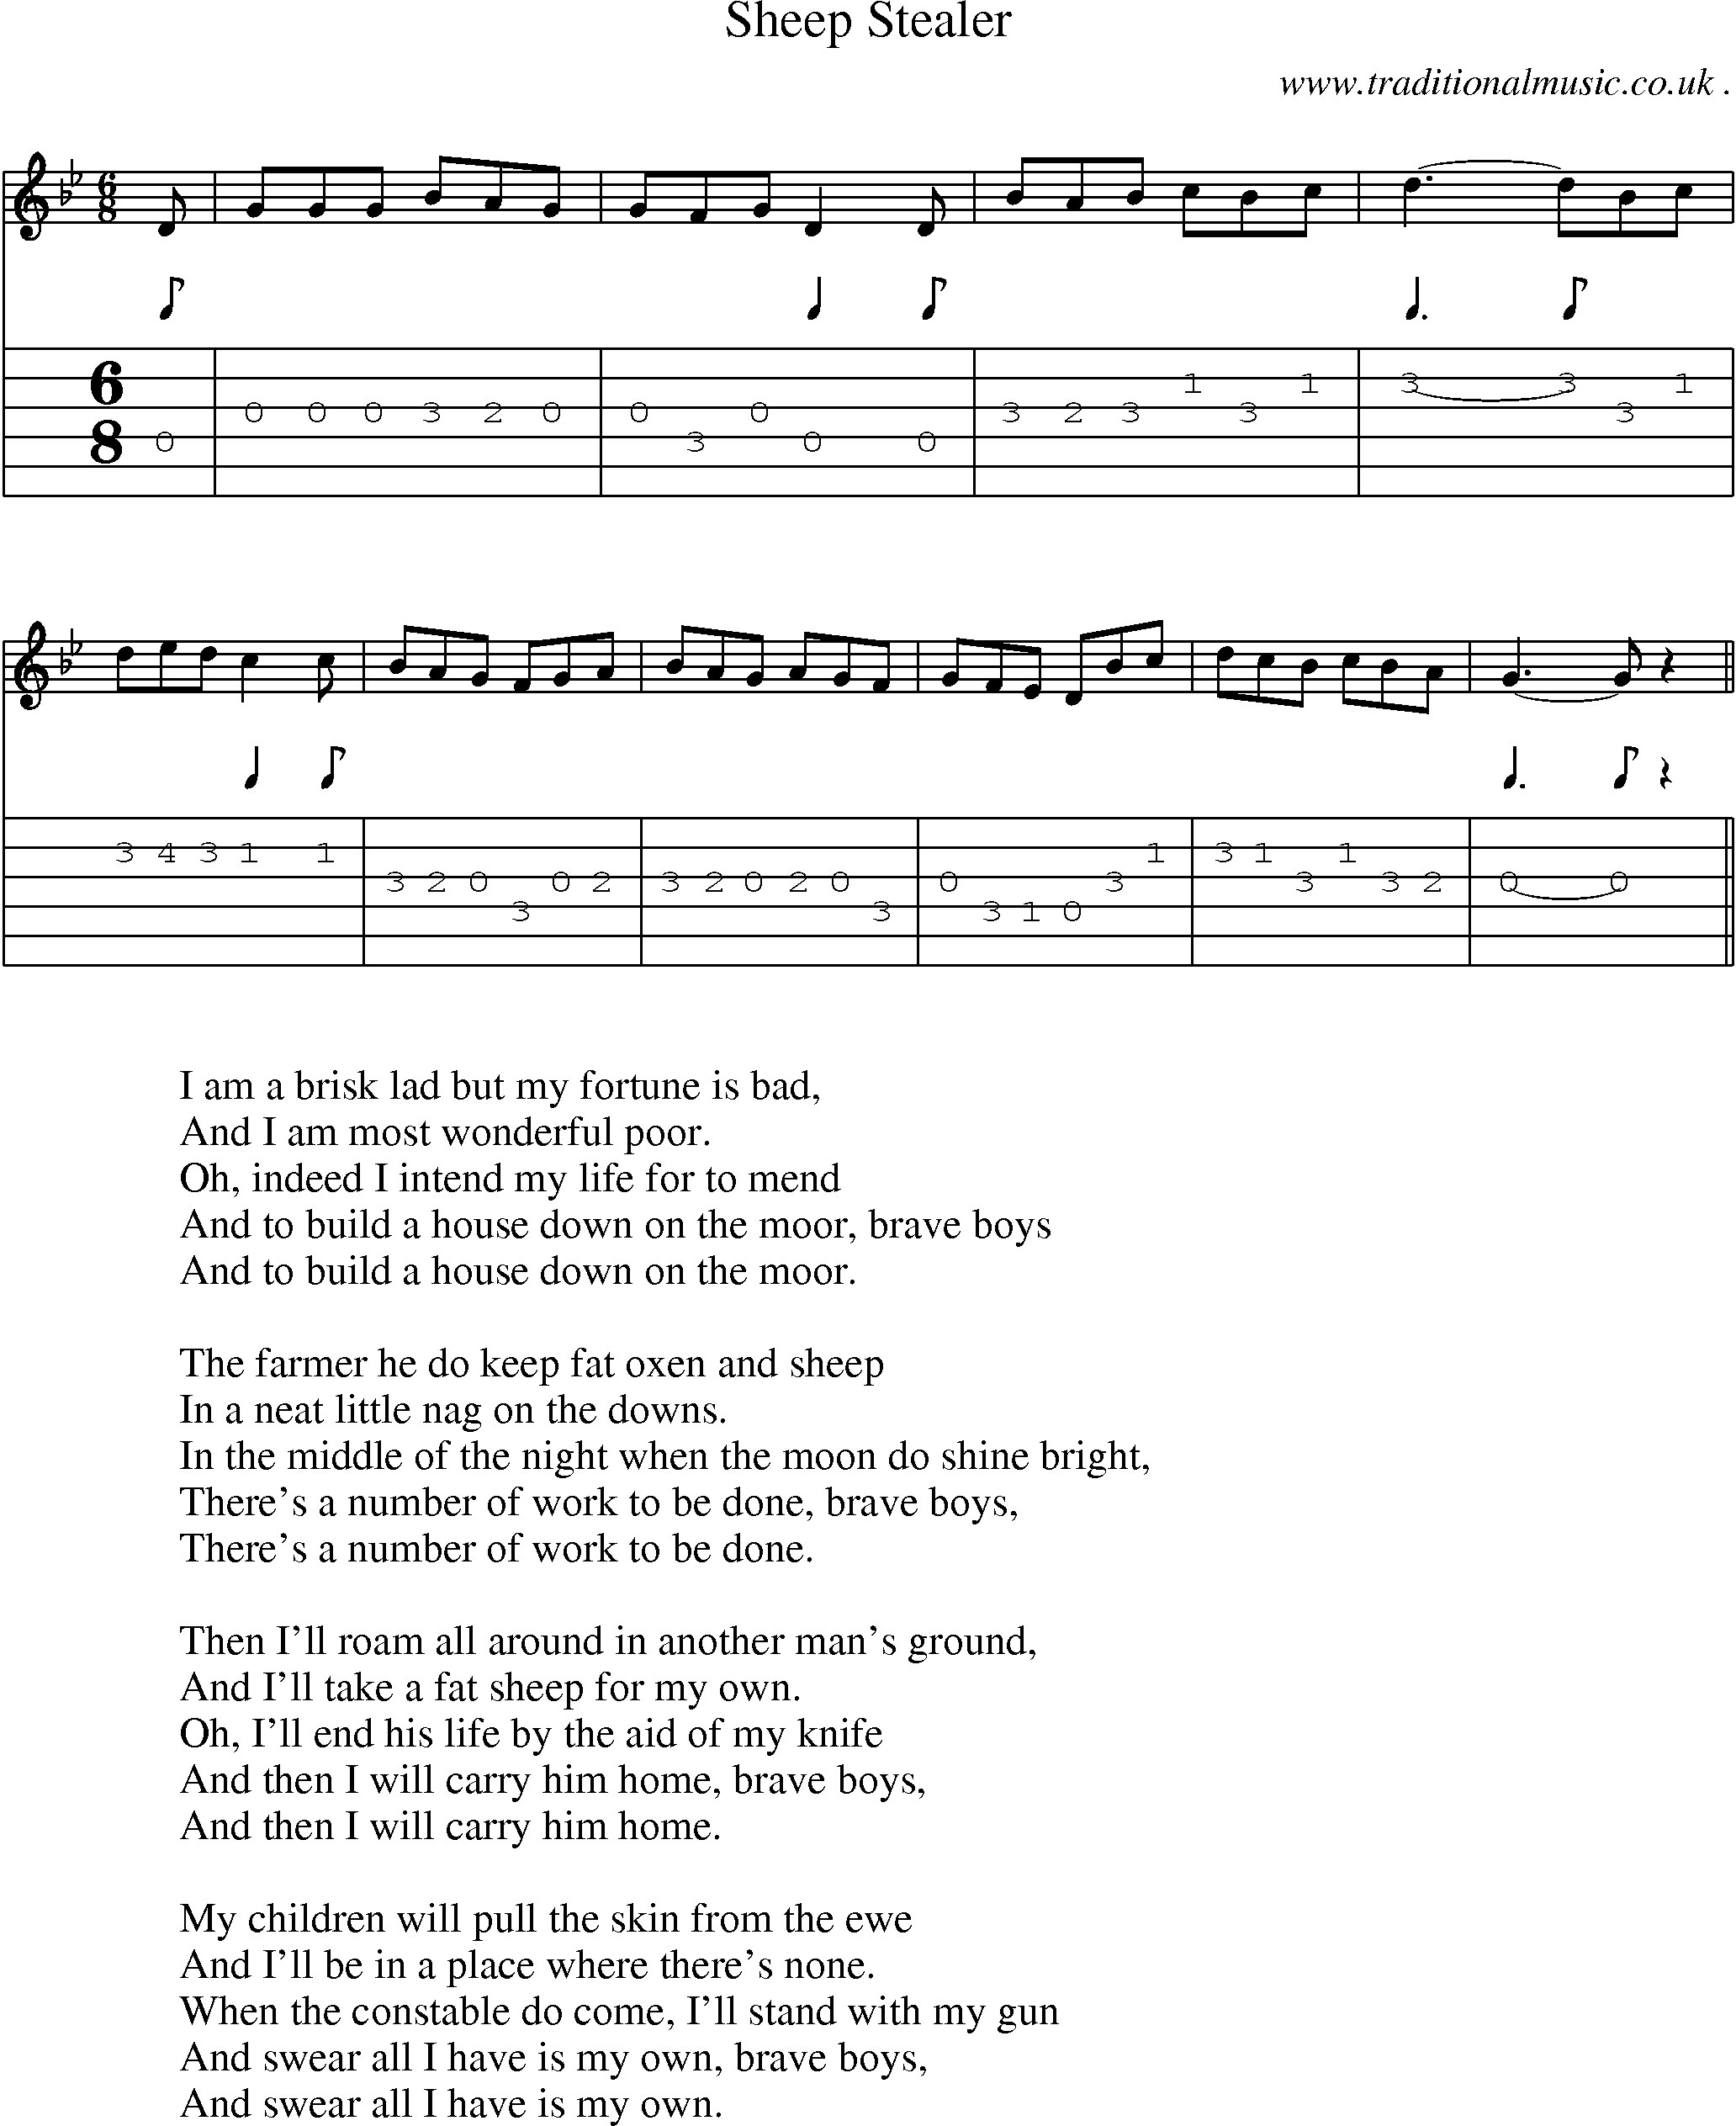 Sheet-Music and Guitar Tabs for Sheep Stealer